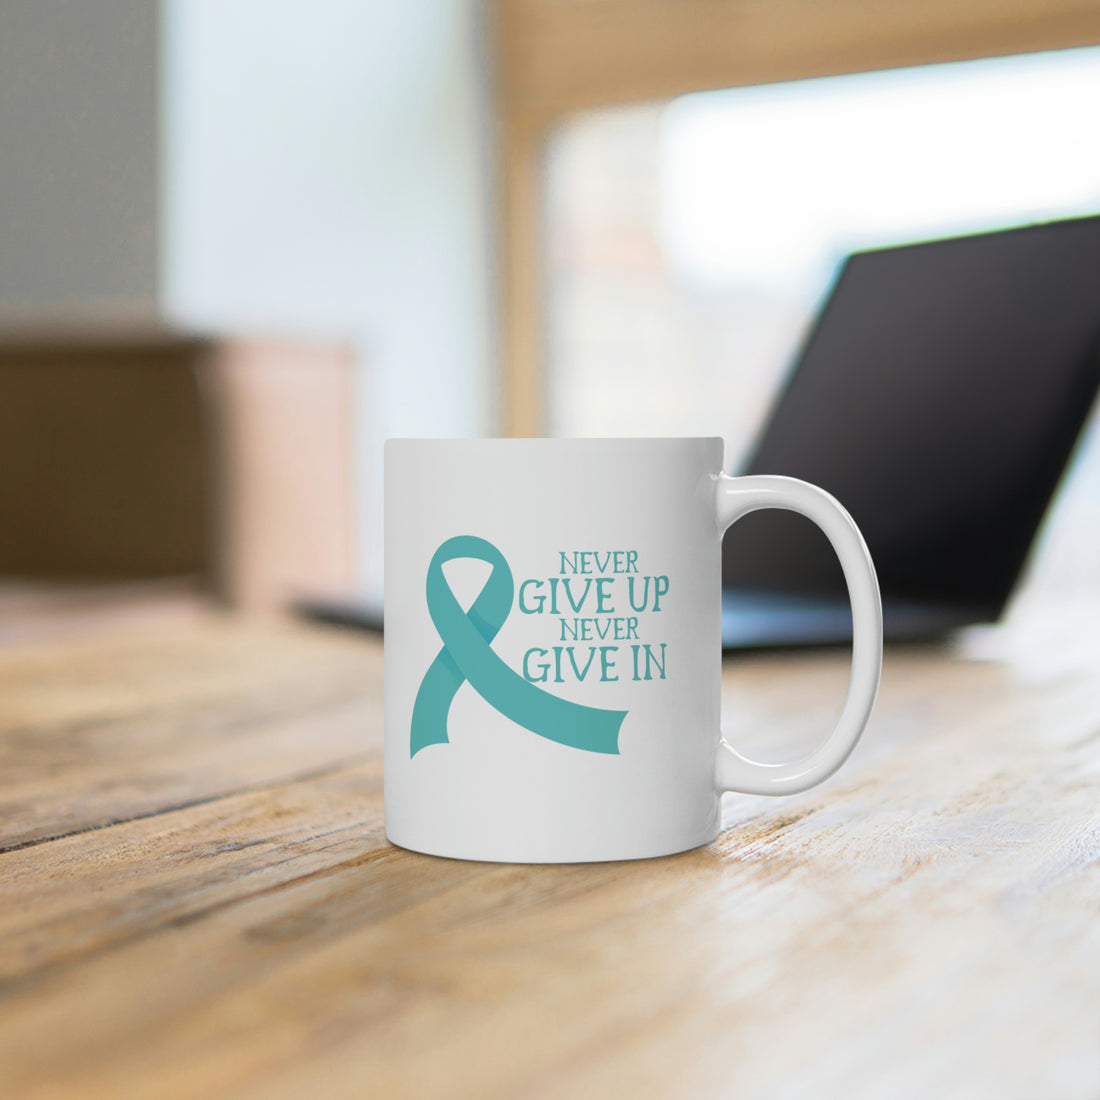 Never Give Up Never Give In - White Ceramic Mug 2 sizes Available